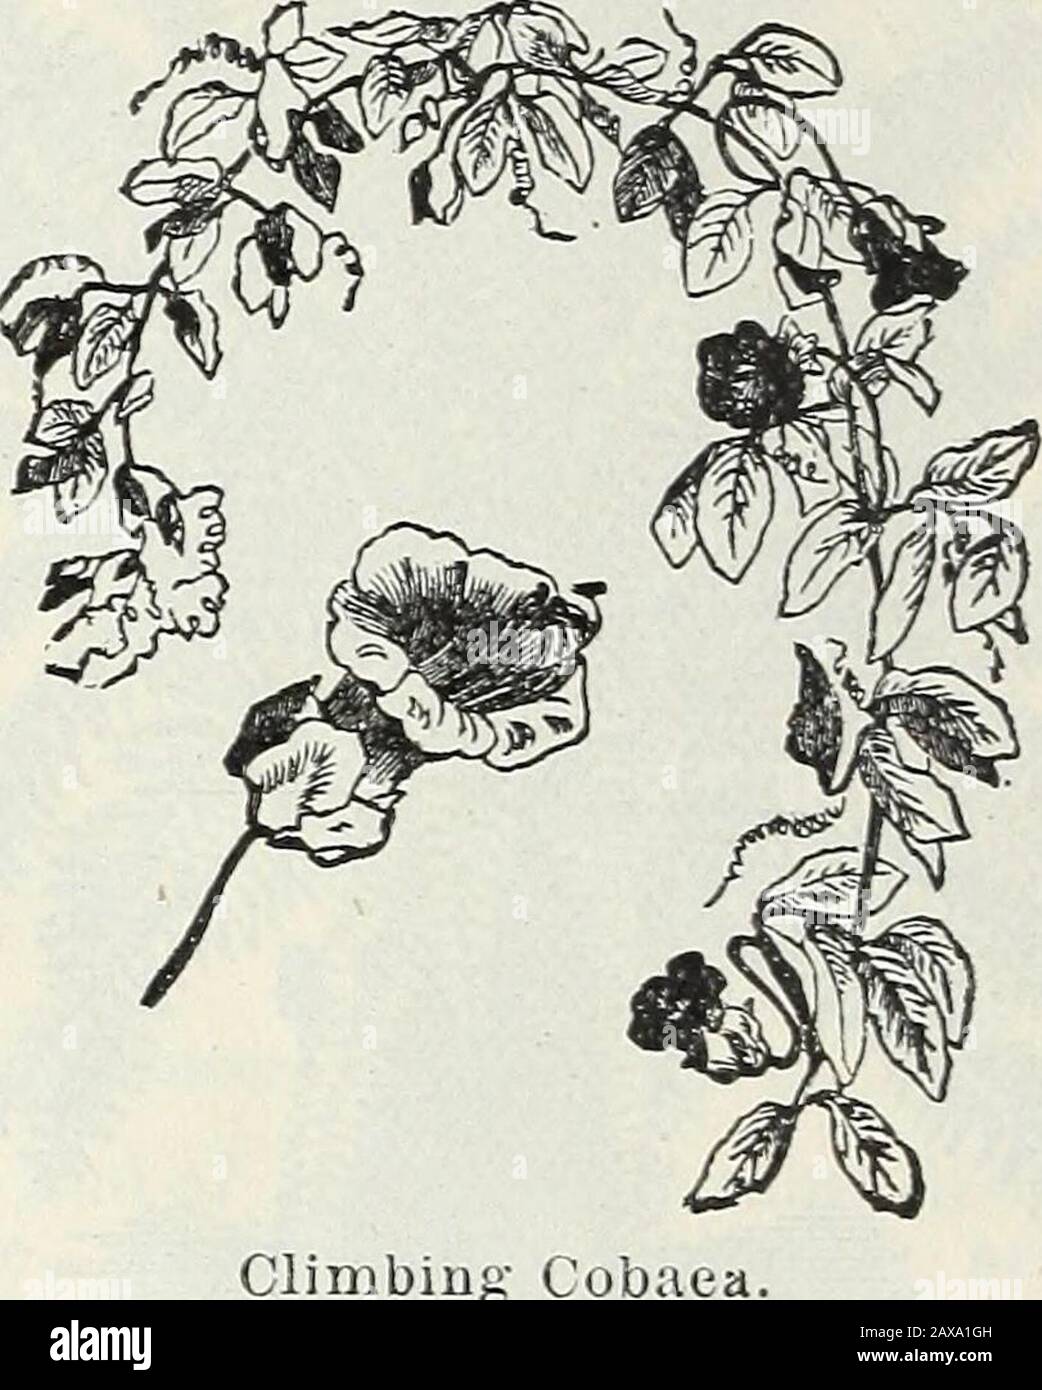 Steckler's seed catalogue and garden manual for the southern states : 1902 . plants ontheir own roots, superior to grafted plants. Clematis Jackmani—Purple, immenseflowers. Clematis JackmaniSuperba—Immensepure white flowers. Clematis, The Gem—Deep lavender,very striking; any of the above, first size,75c. each; extra size $1.00 each. Clematis PaniculaTa—One of the mostbeautiful of our hardy flowering vines. Theflowers are pure white and are borne ingreat panicles or clusters of bloom, fairly covering the plants so that it is a mass orsheet of fleecy white. The fragrance is de-licious, resemblin Stock Photo